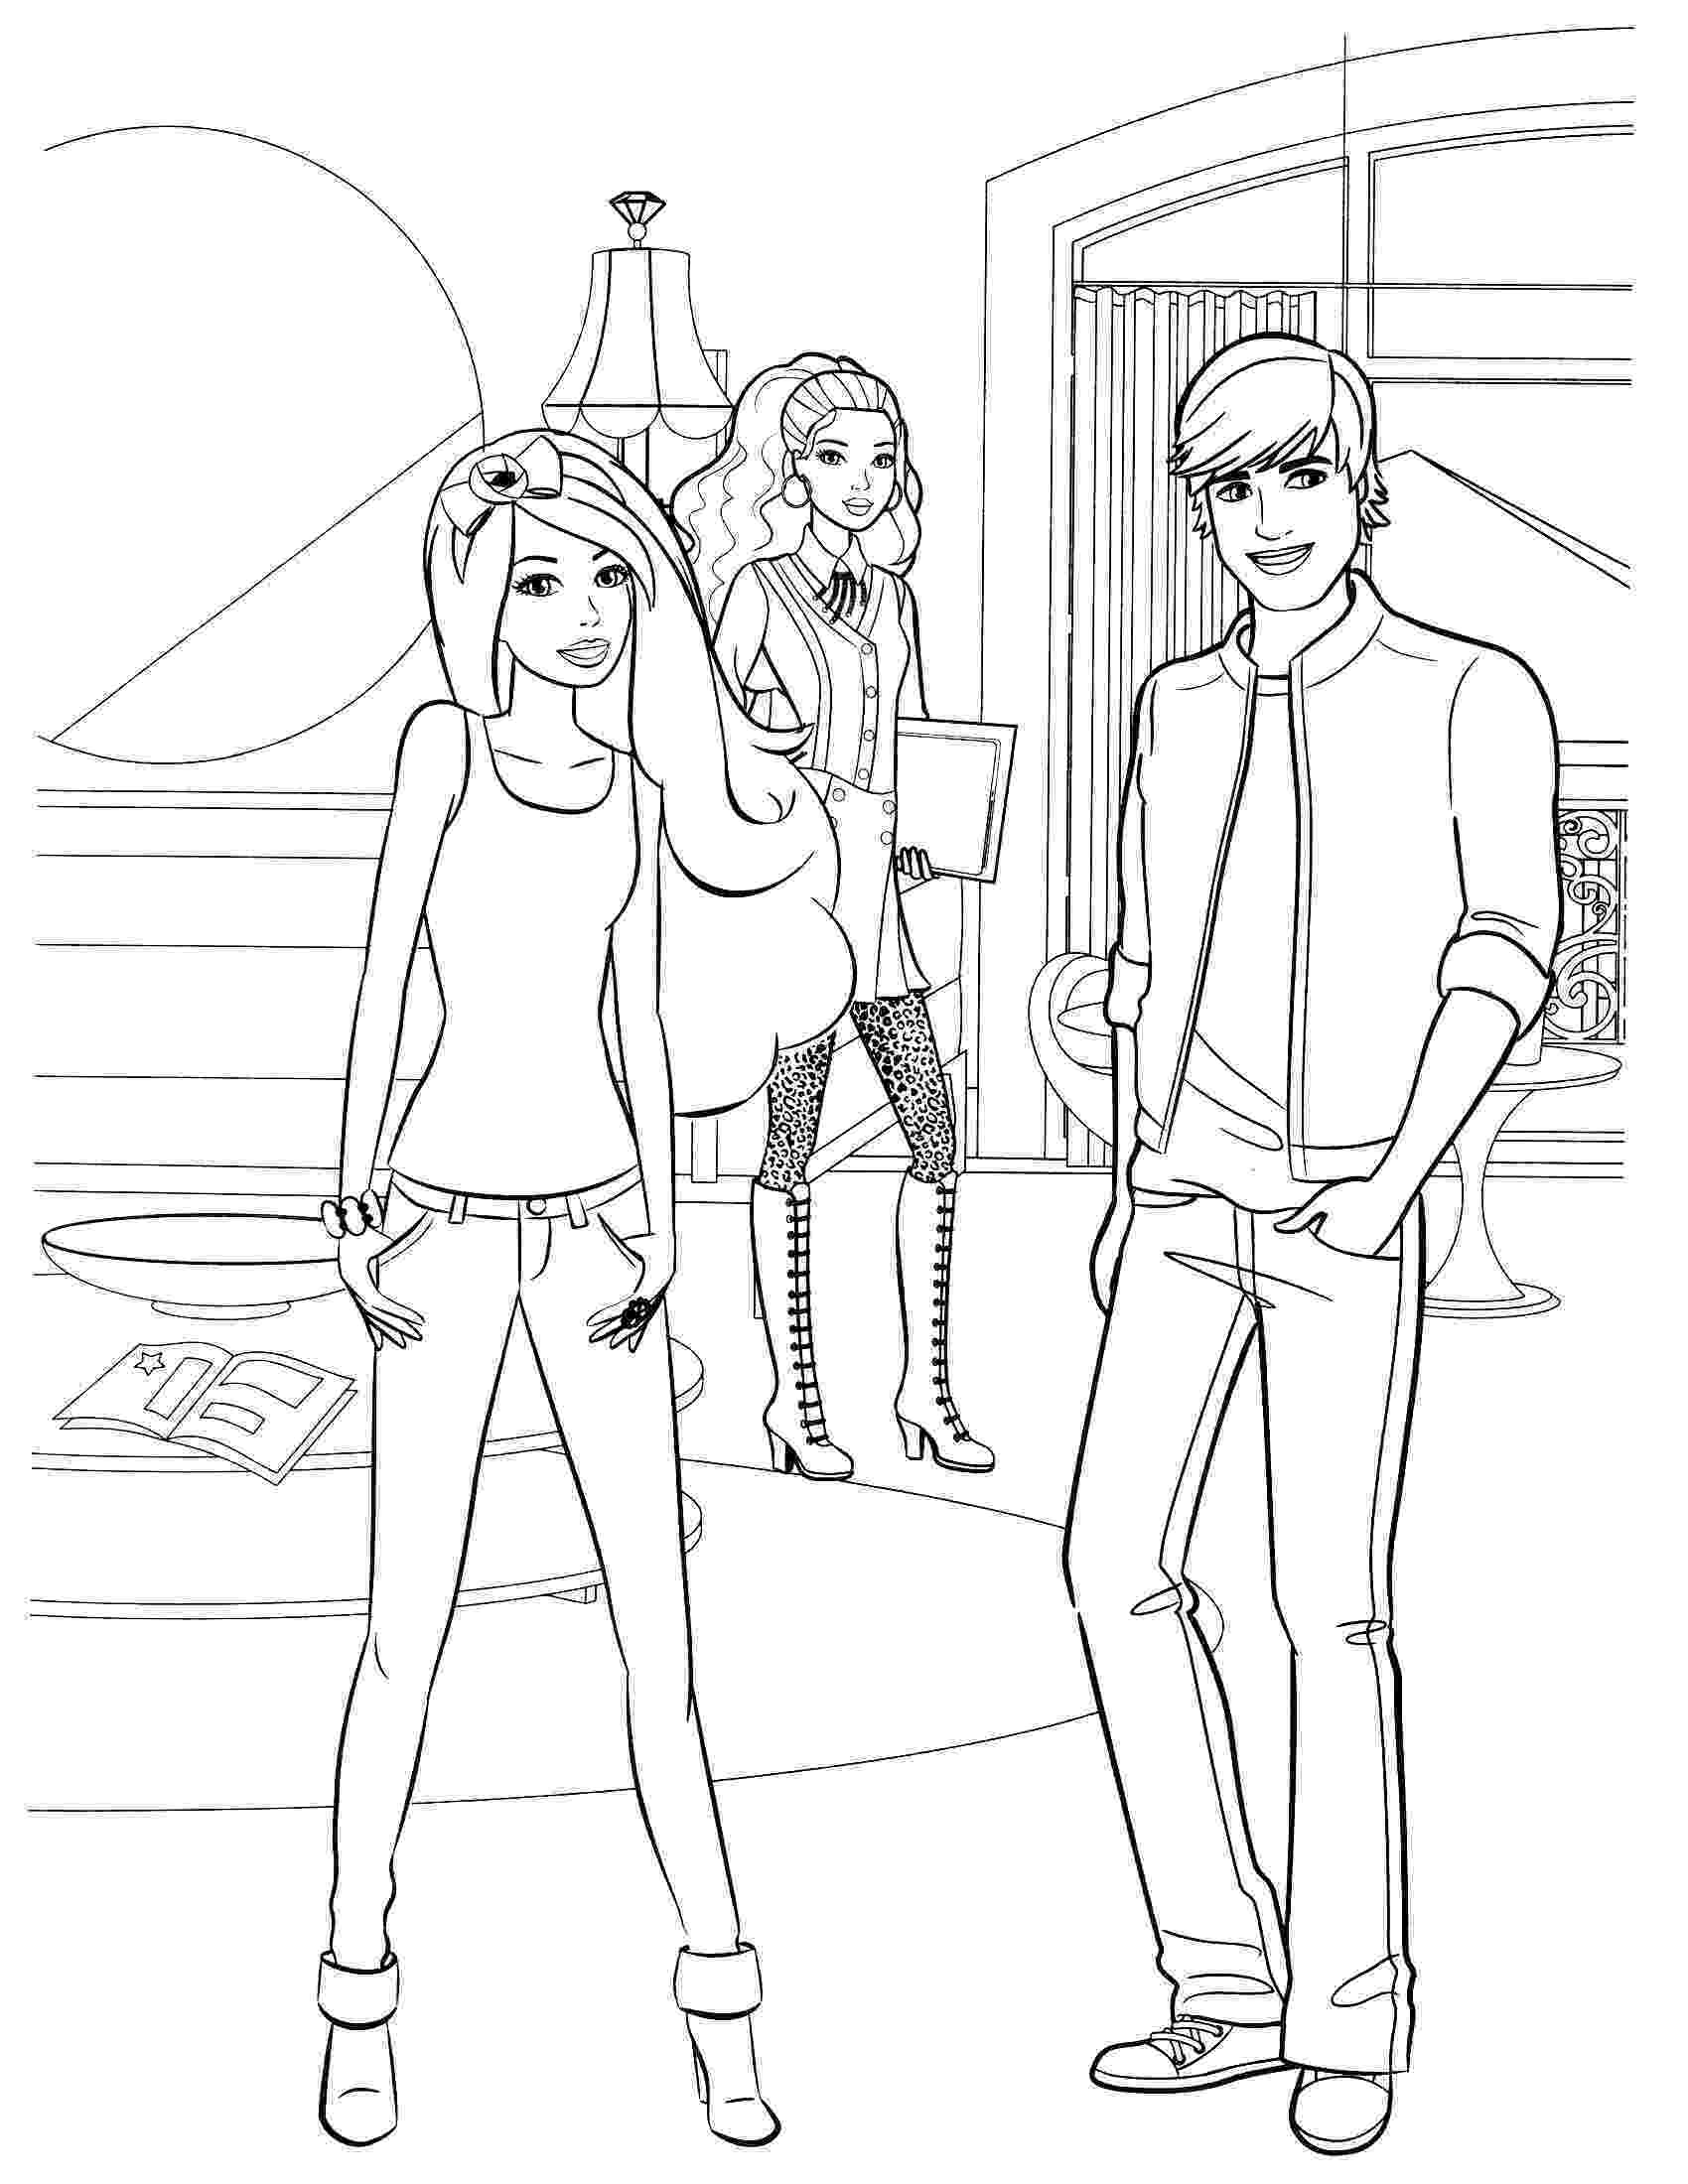 barbie and ken coloring sheets barbie 50 coloringcolorcom sheets and barbie ken coloring 